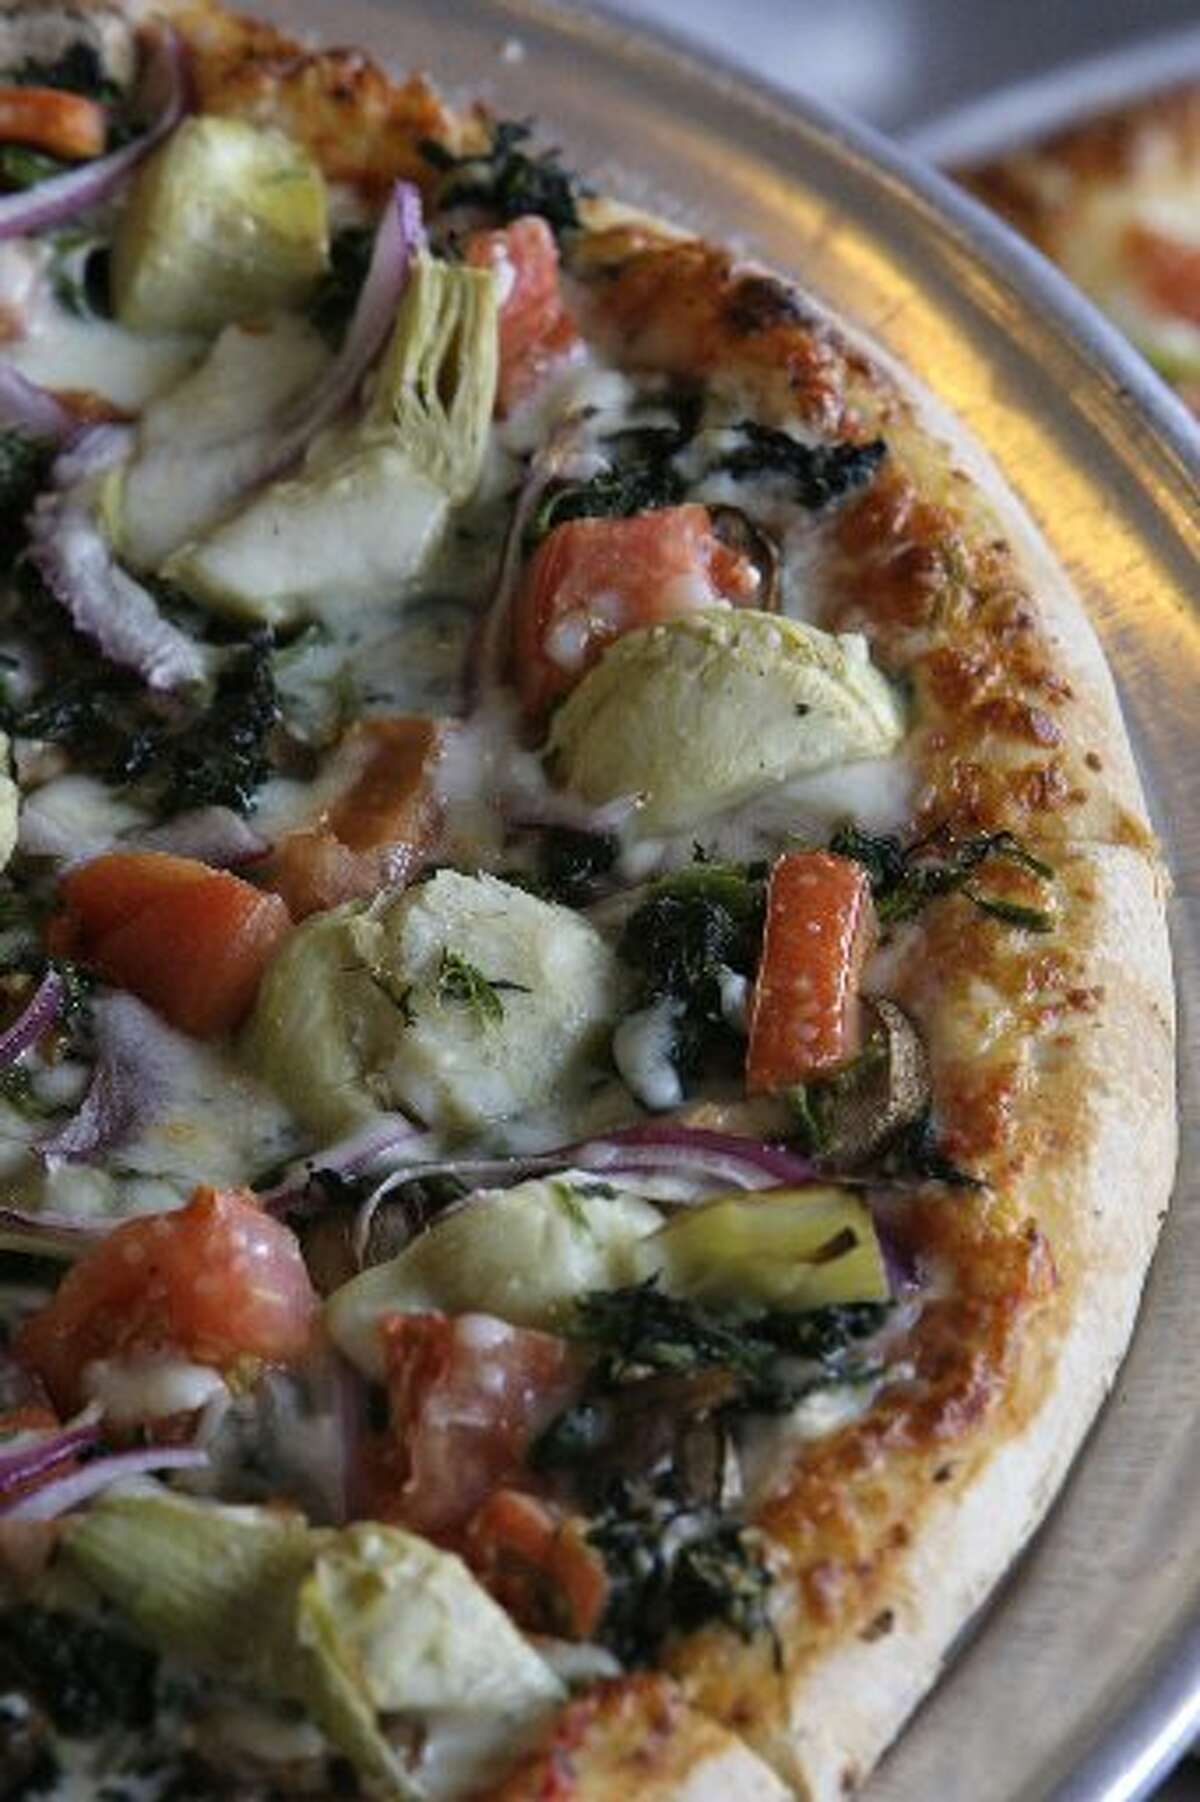 Rome's Pizza Vegetarian Deluxe come with Mozzarella, spinach, mushrooms, artichoke hearts, tomatoes and red onions.